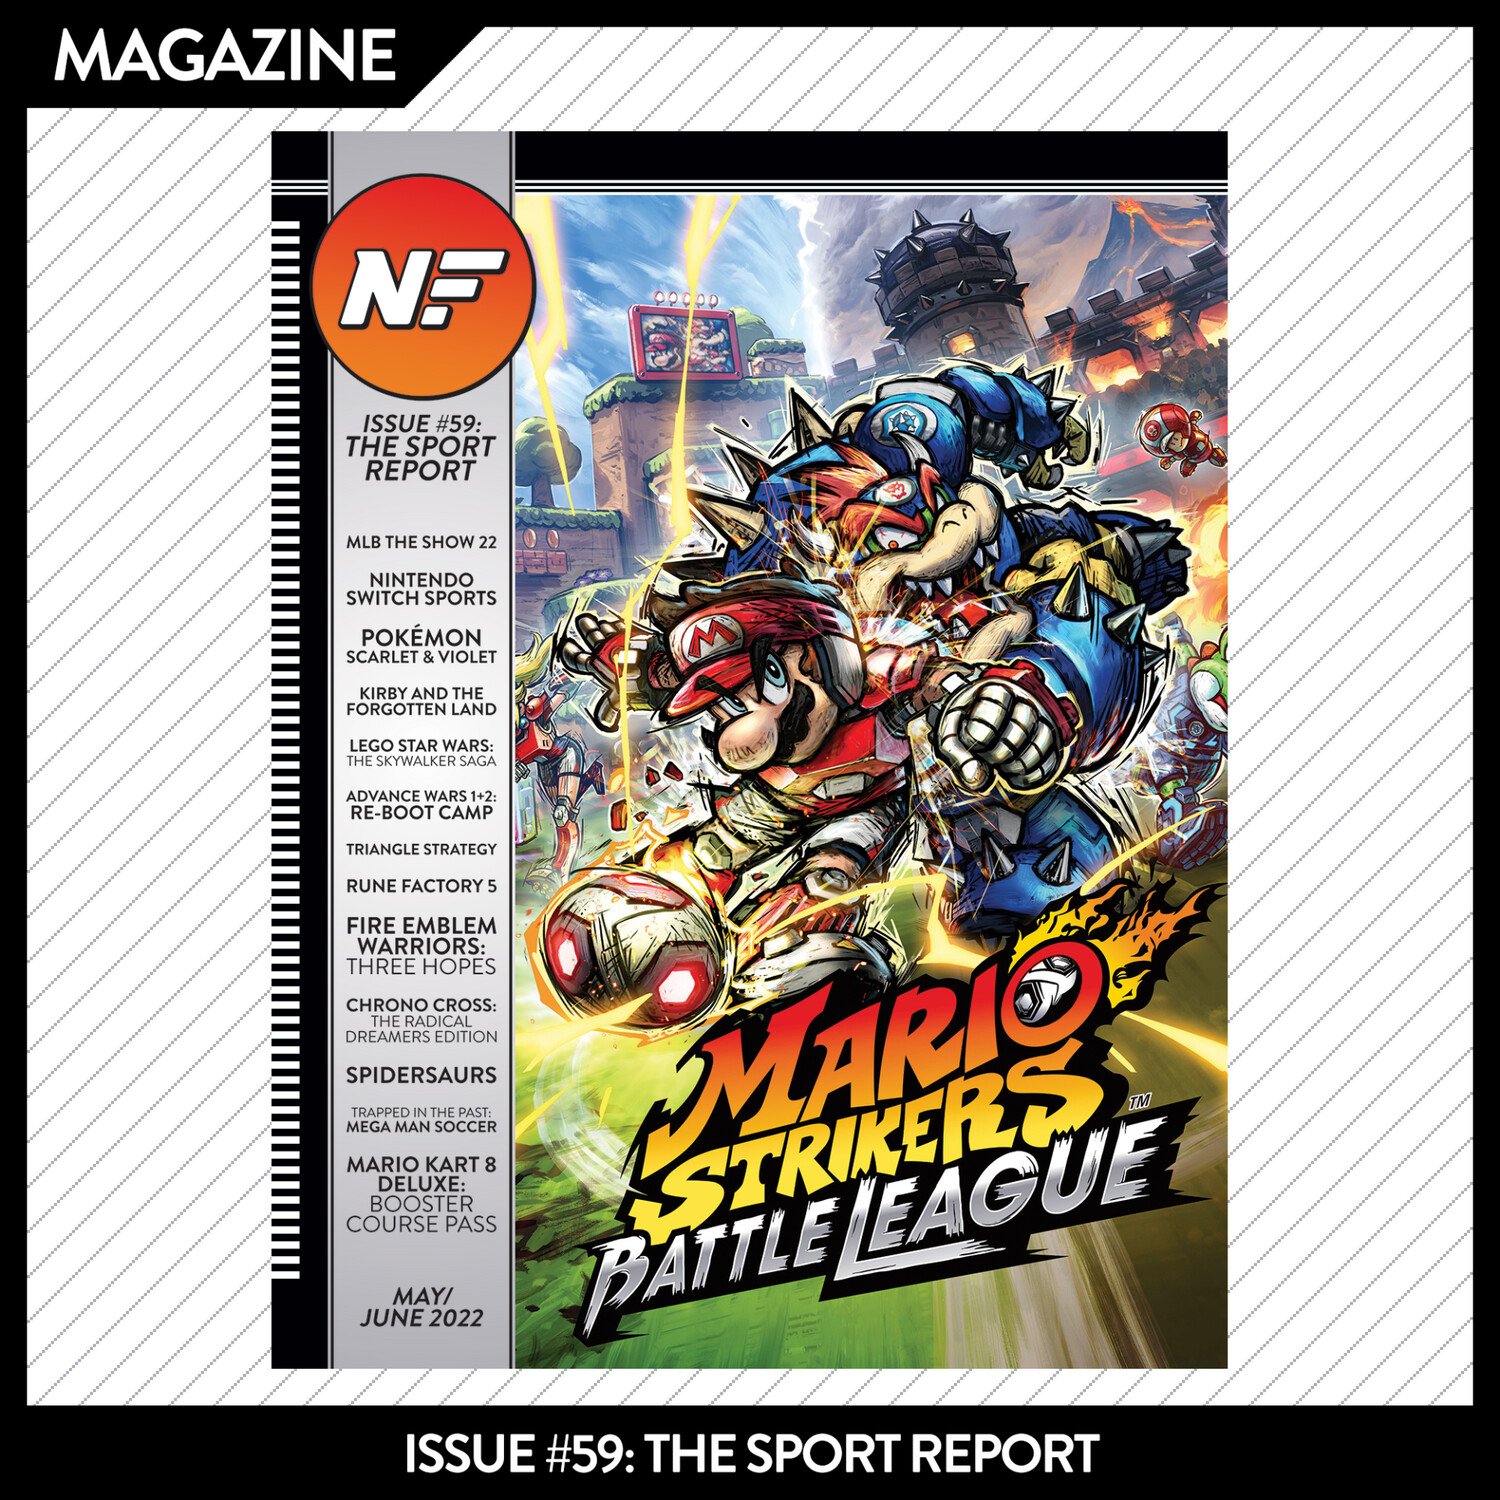 Issue #59: The Sport Report – May/June 2022